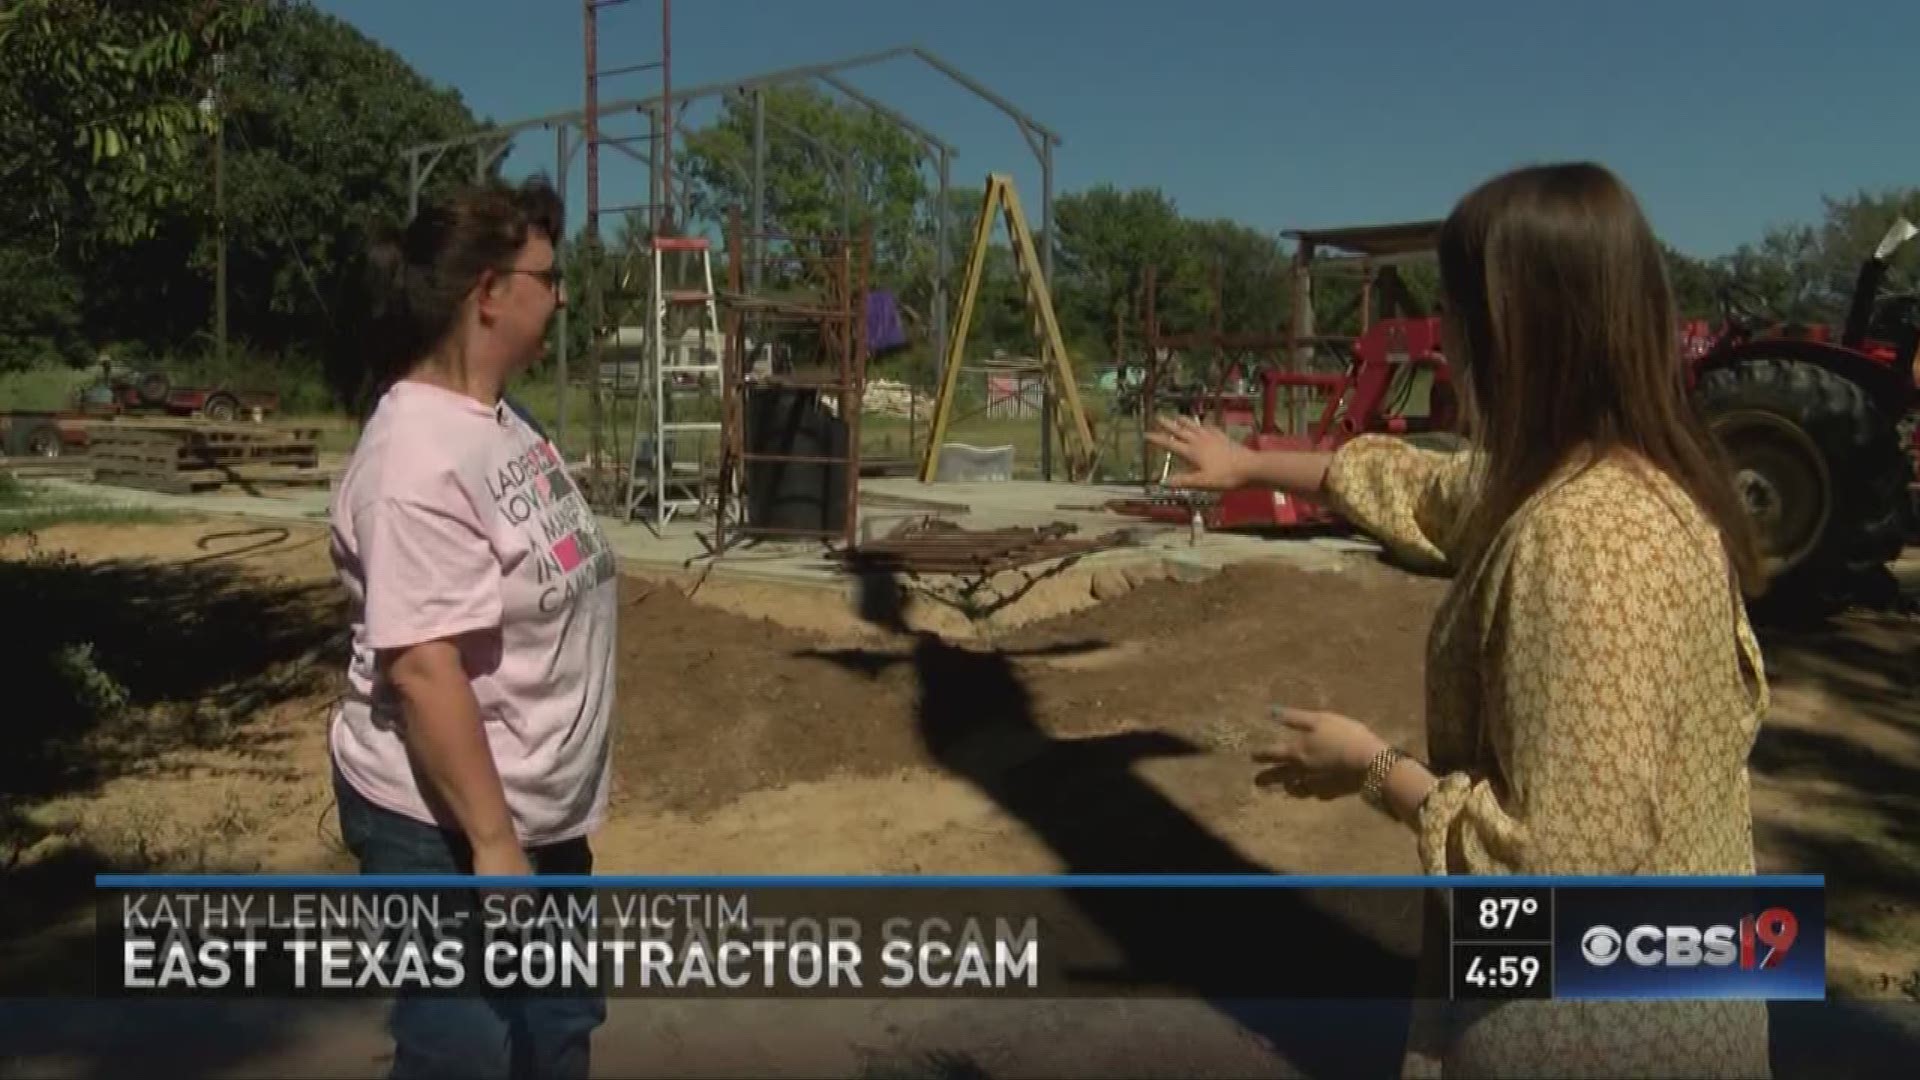 An ETX family is saying they were "ripped off" by a contractor.  